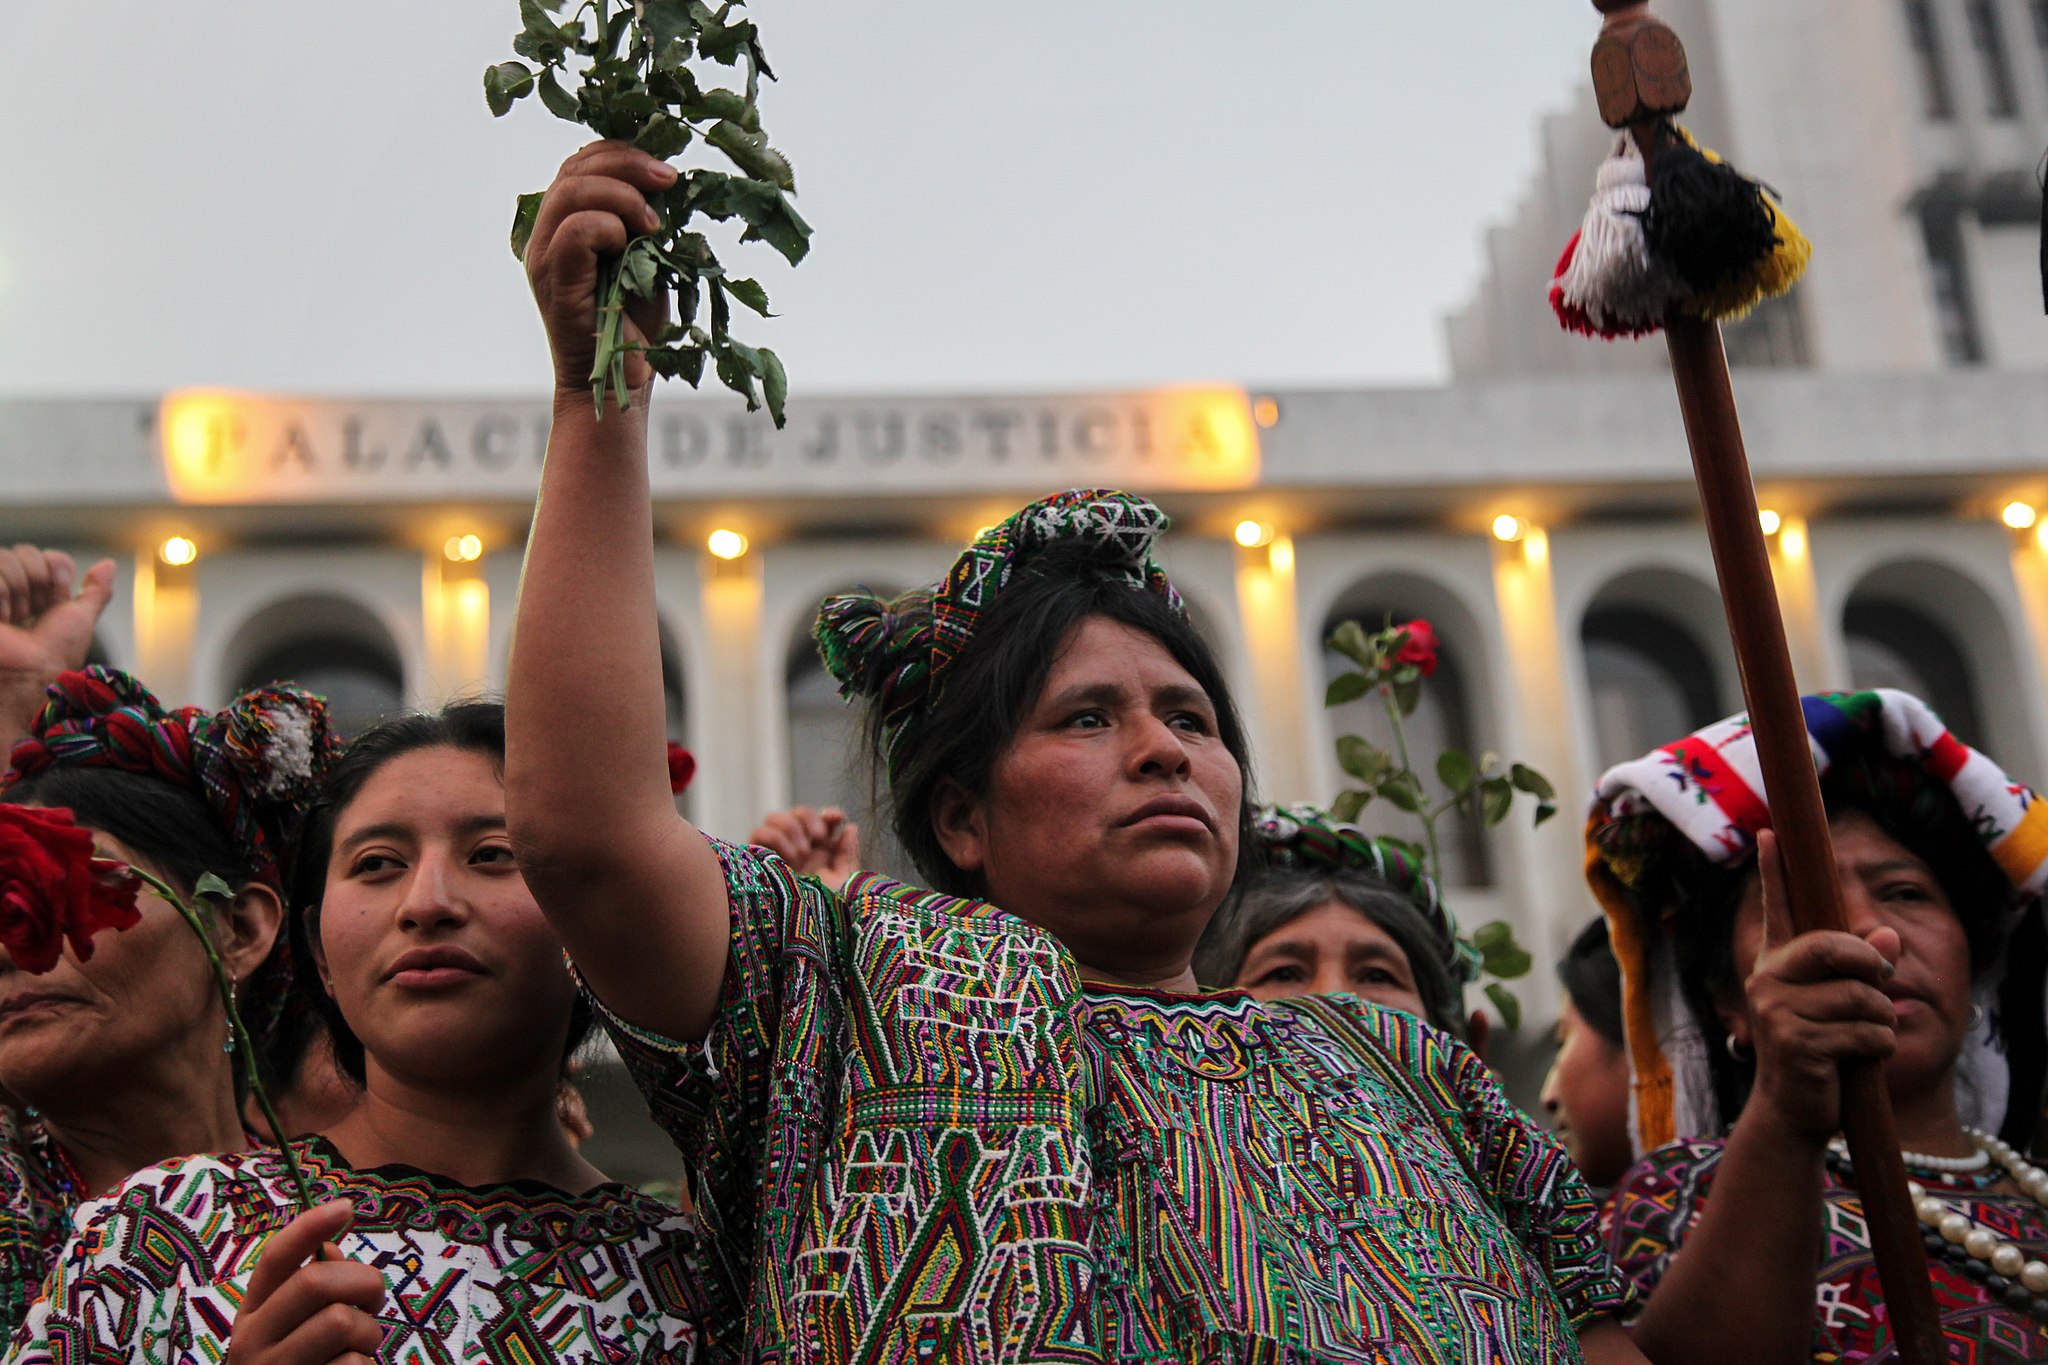 Ixil women celebrate after former Guatemalan dictator Rios Montt was found guilty of genocide against the indigenous Ixil people in the 1980s. Creative Commons.